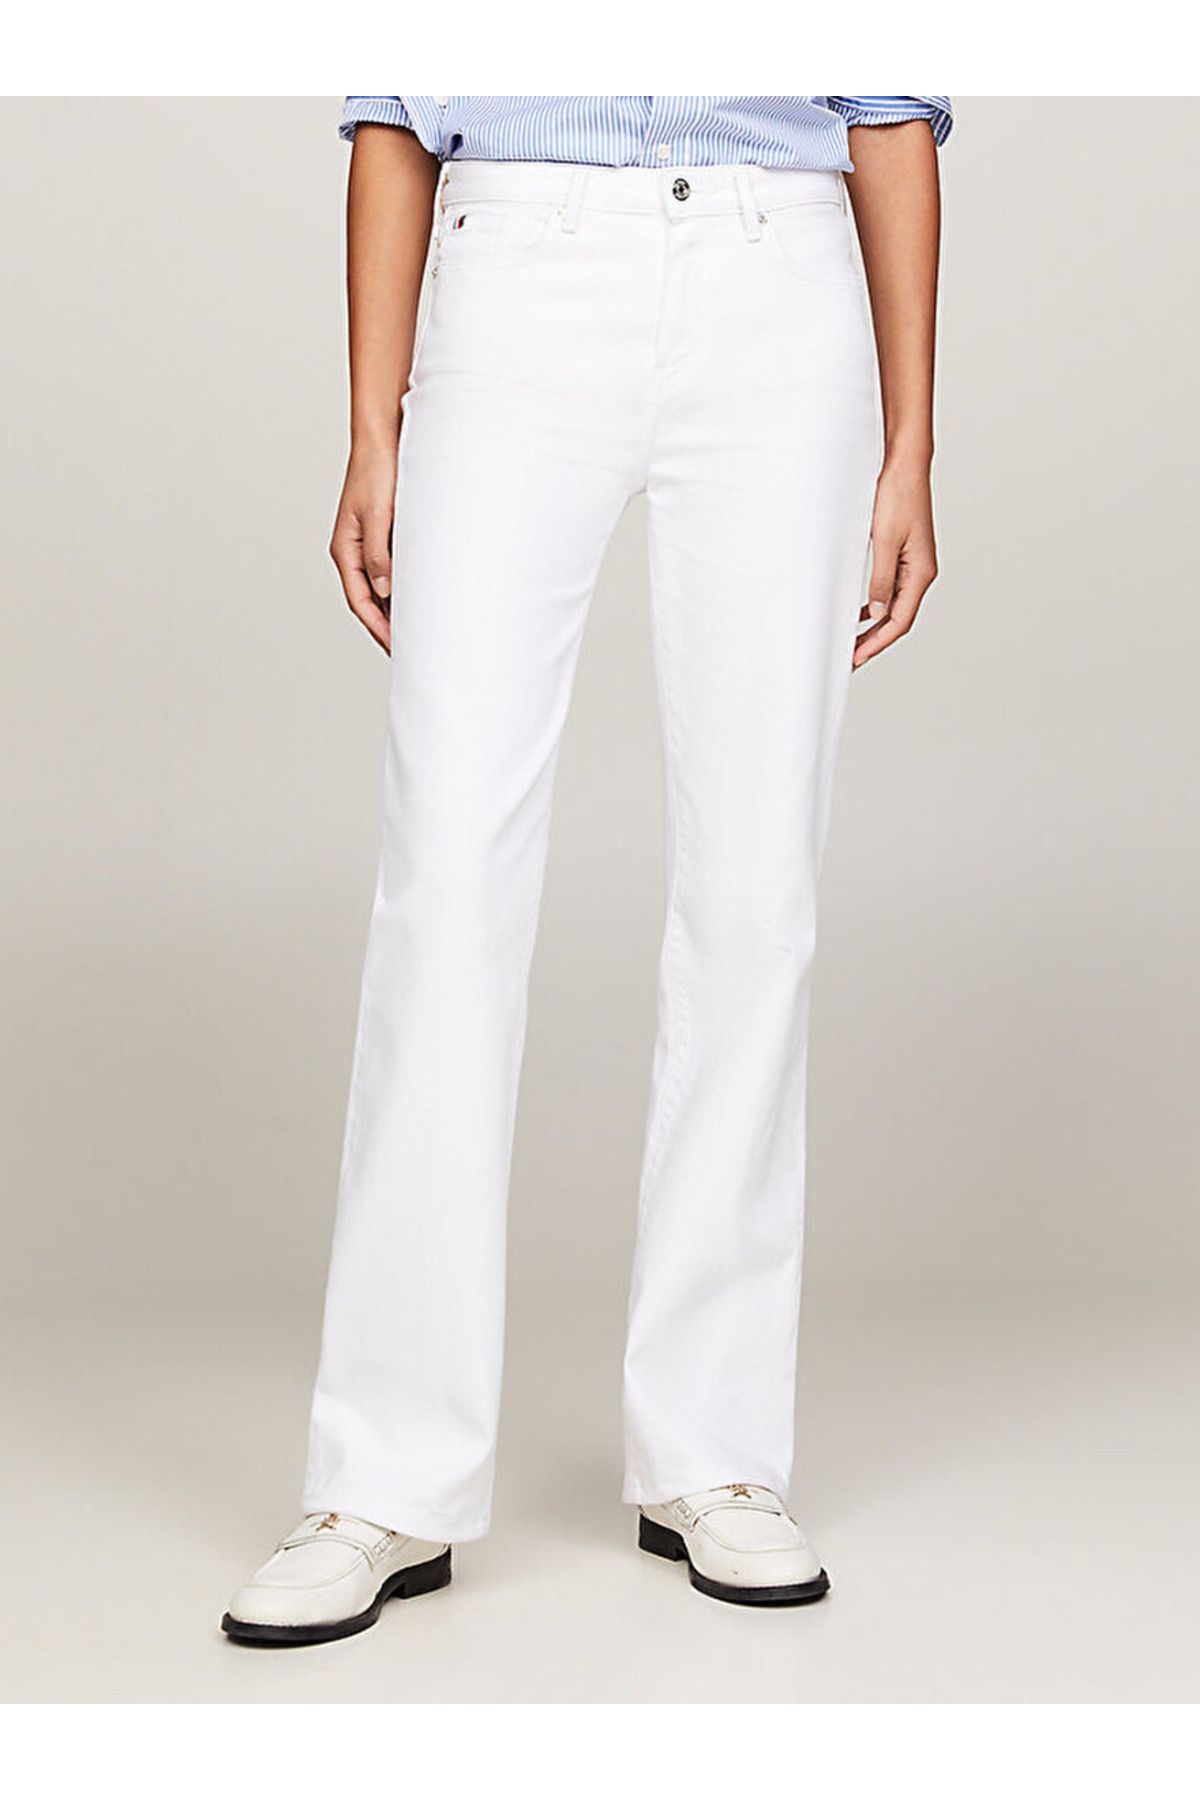 Tommy Hilfiger Mid Rise Bootcut White Jeans